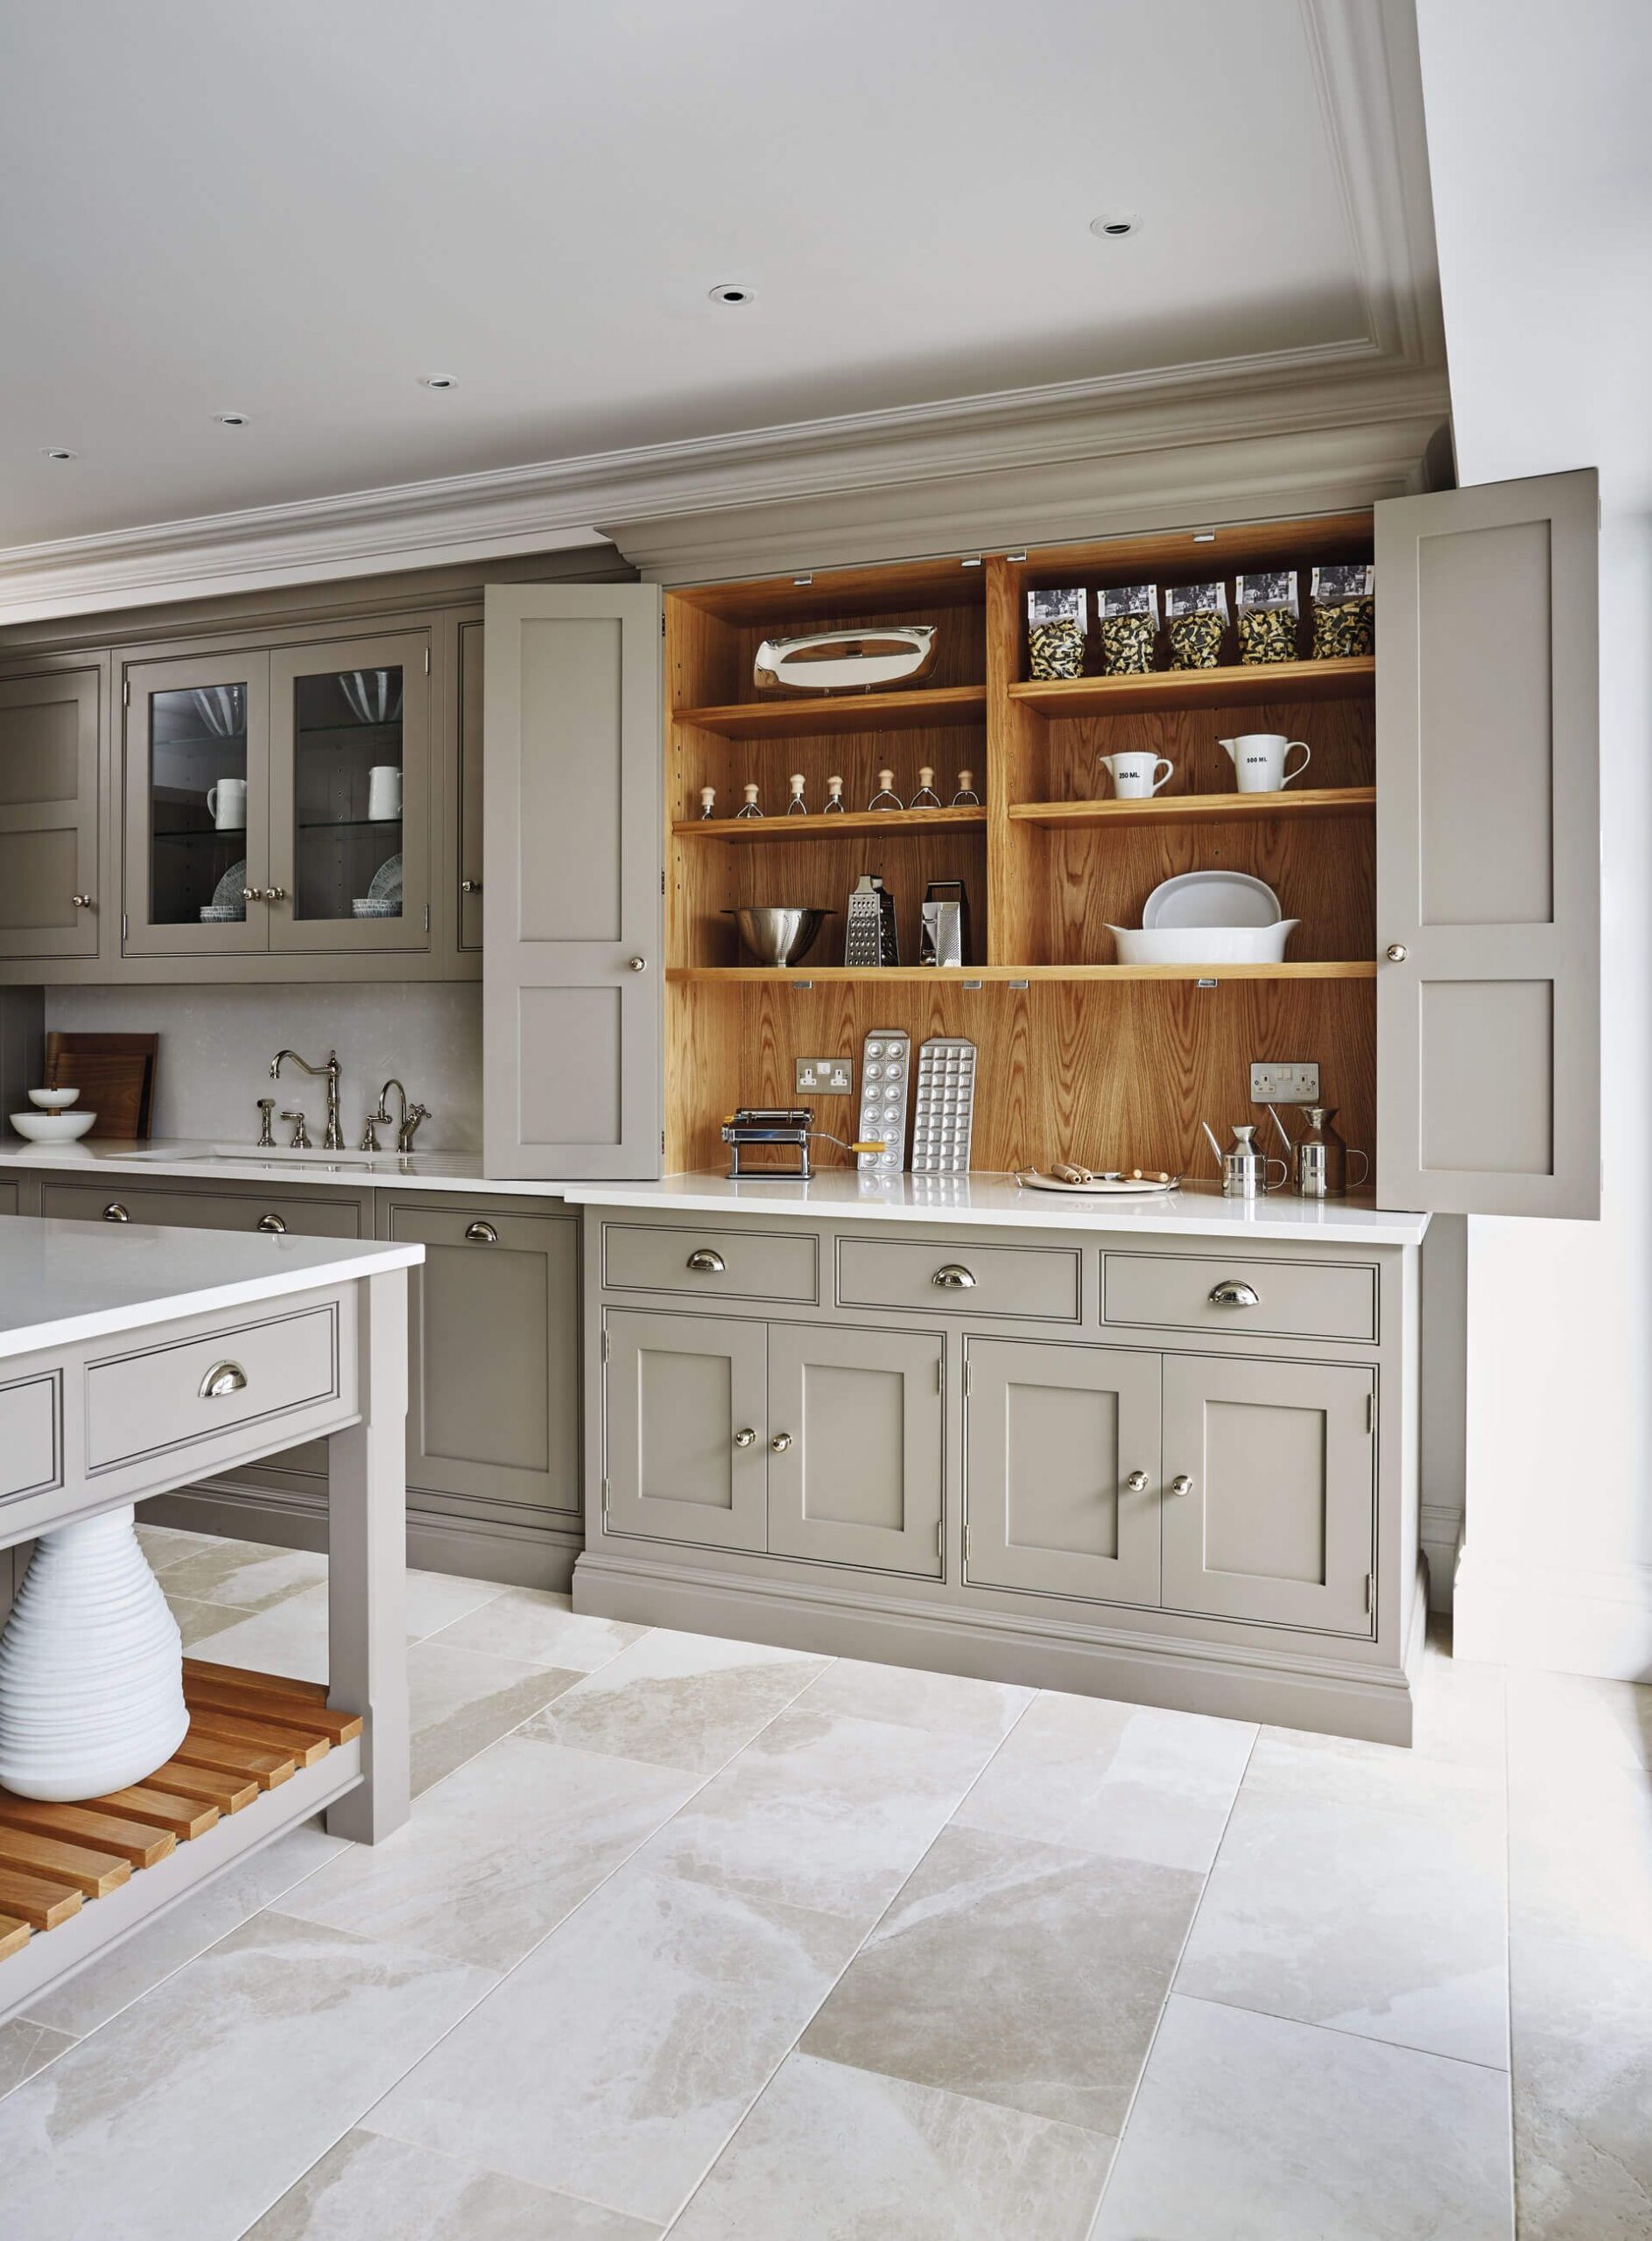 The Latest Trends in Kitchen Unit
Materials and Finishes